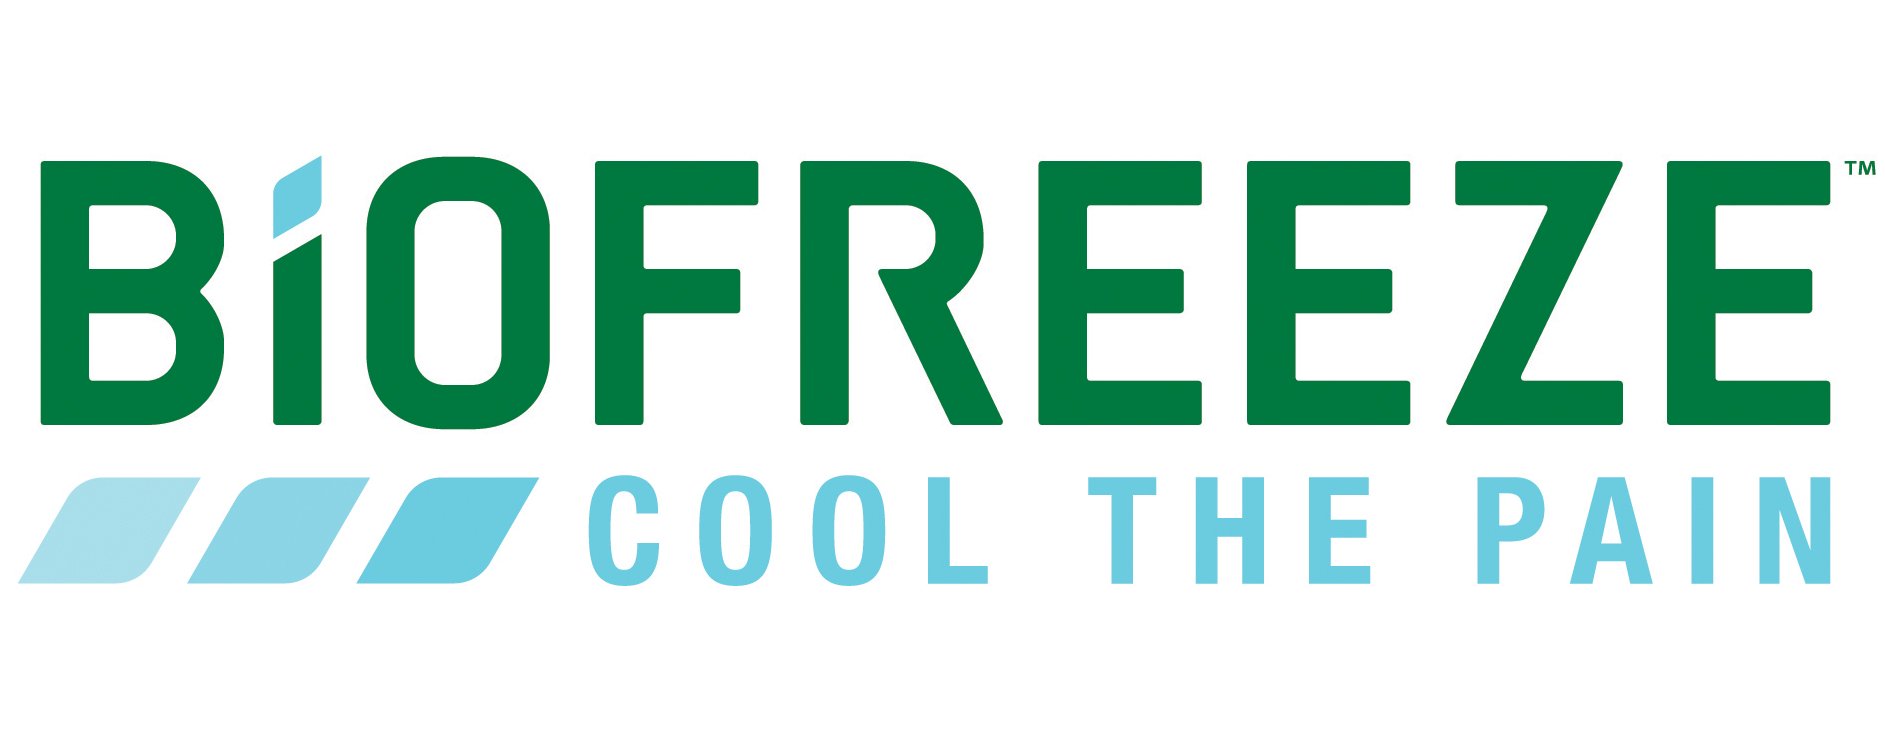 Green type logo which says BioFreeze.